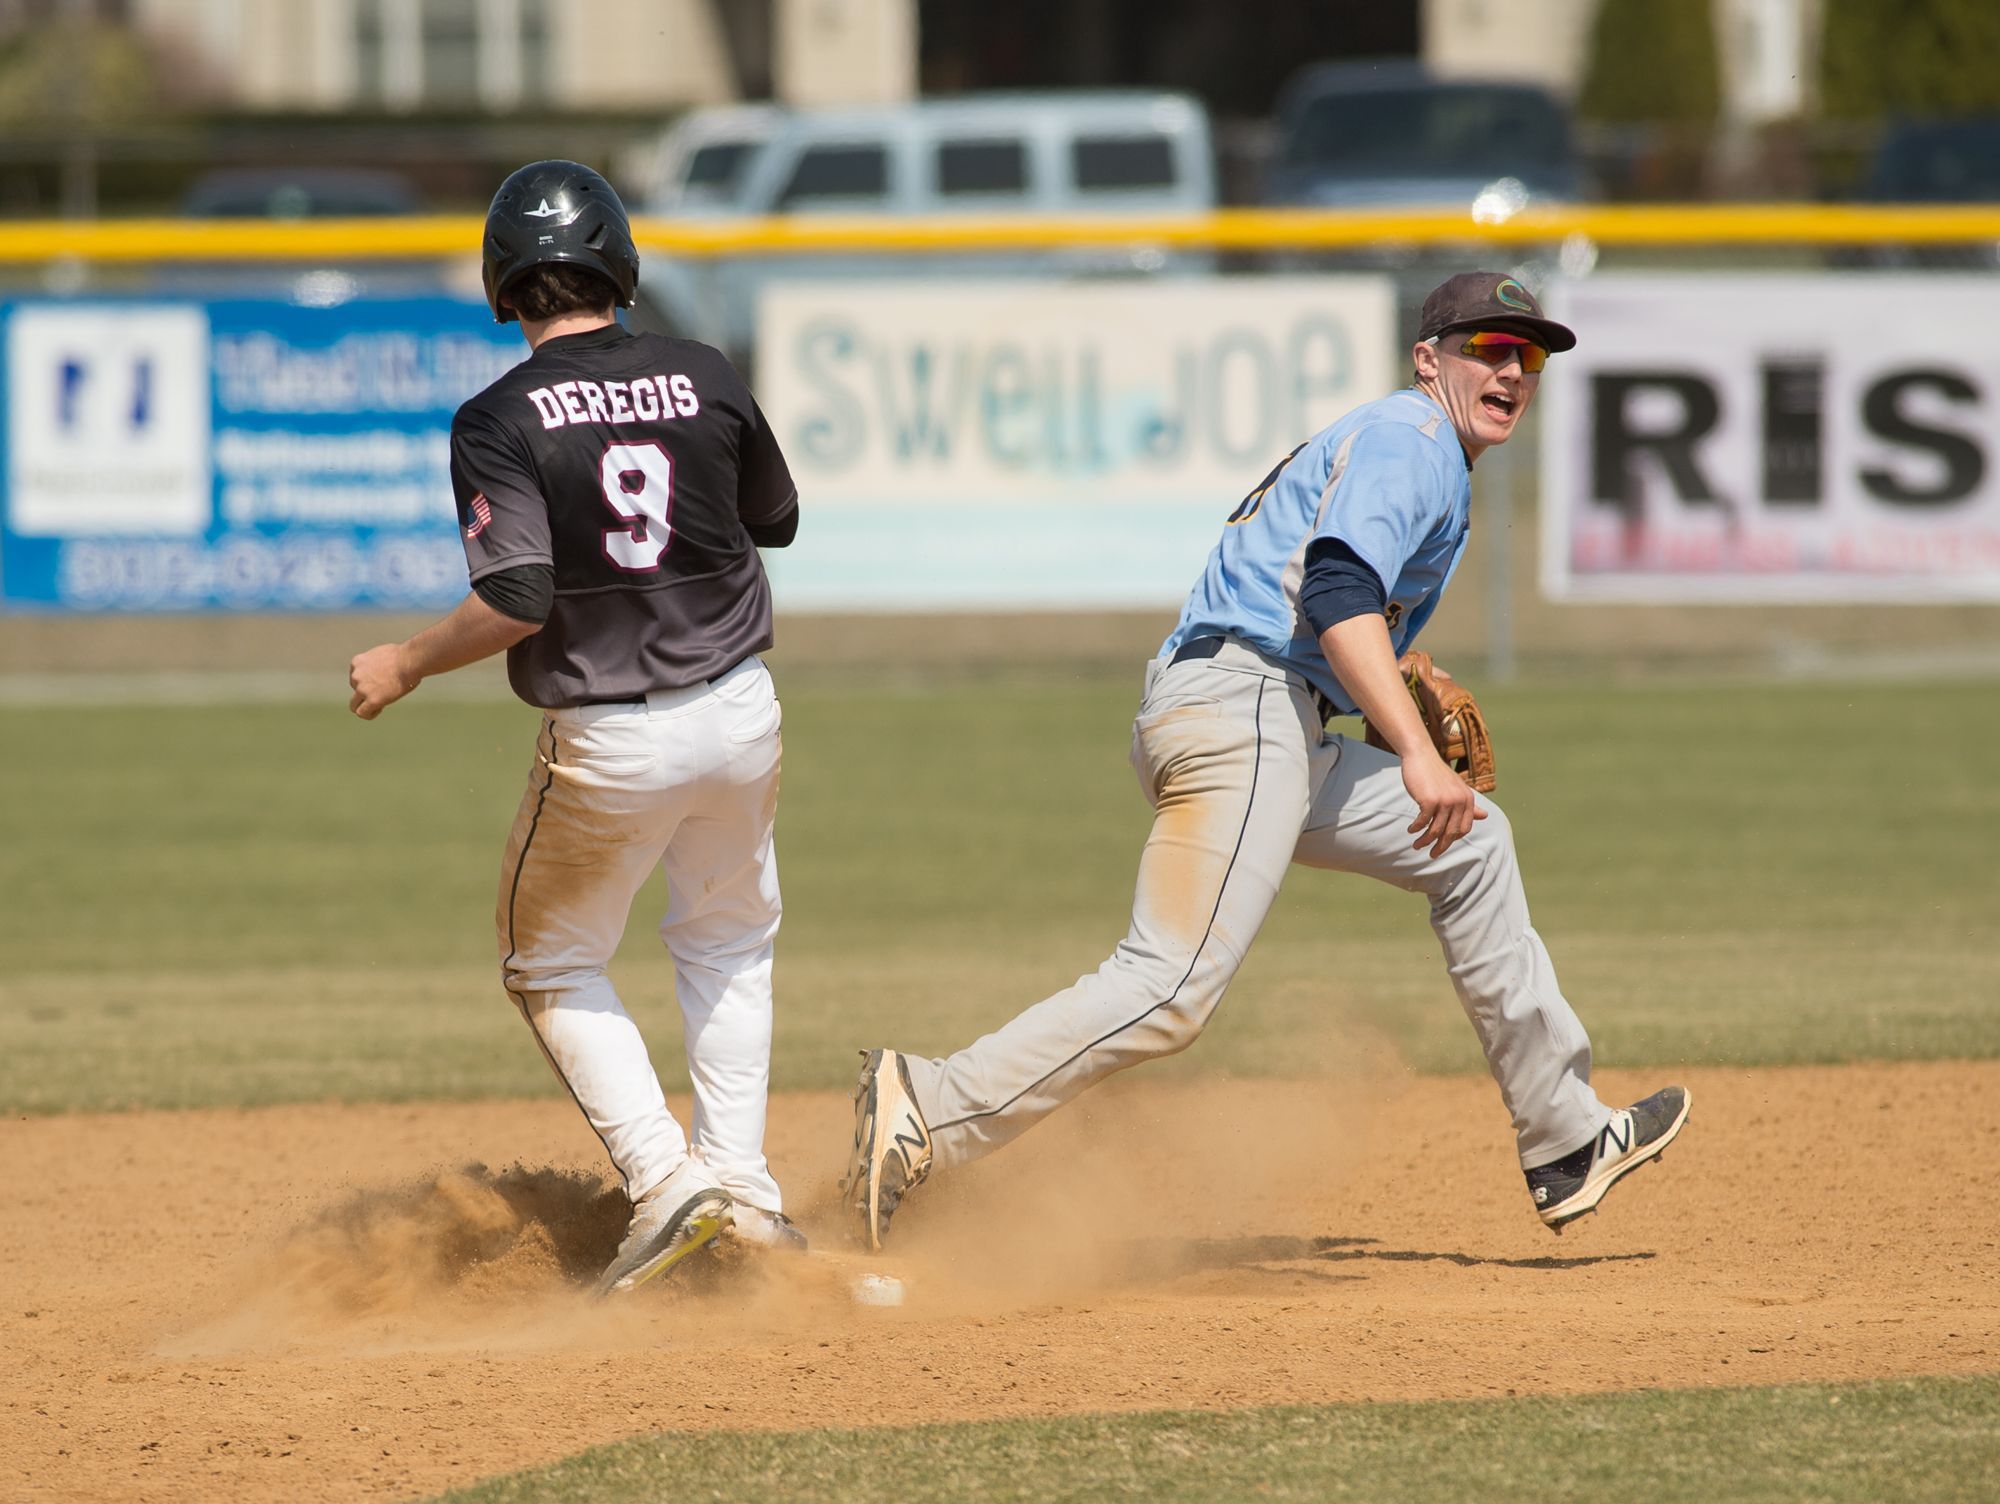 Cape Henlopen’s Zachary Gelof (11) tags out Caravel’s Ethan deRegis (9) at second base.